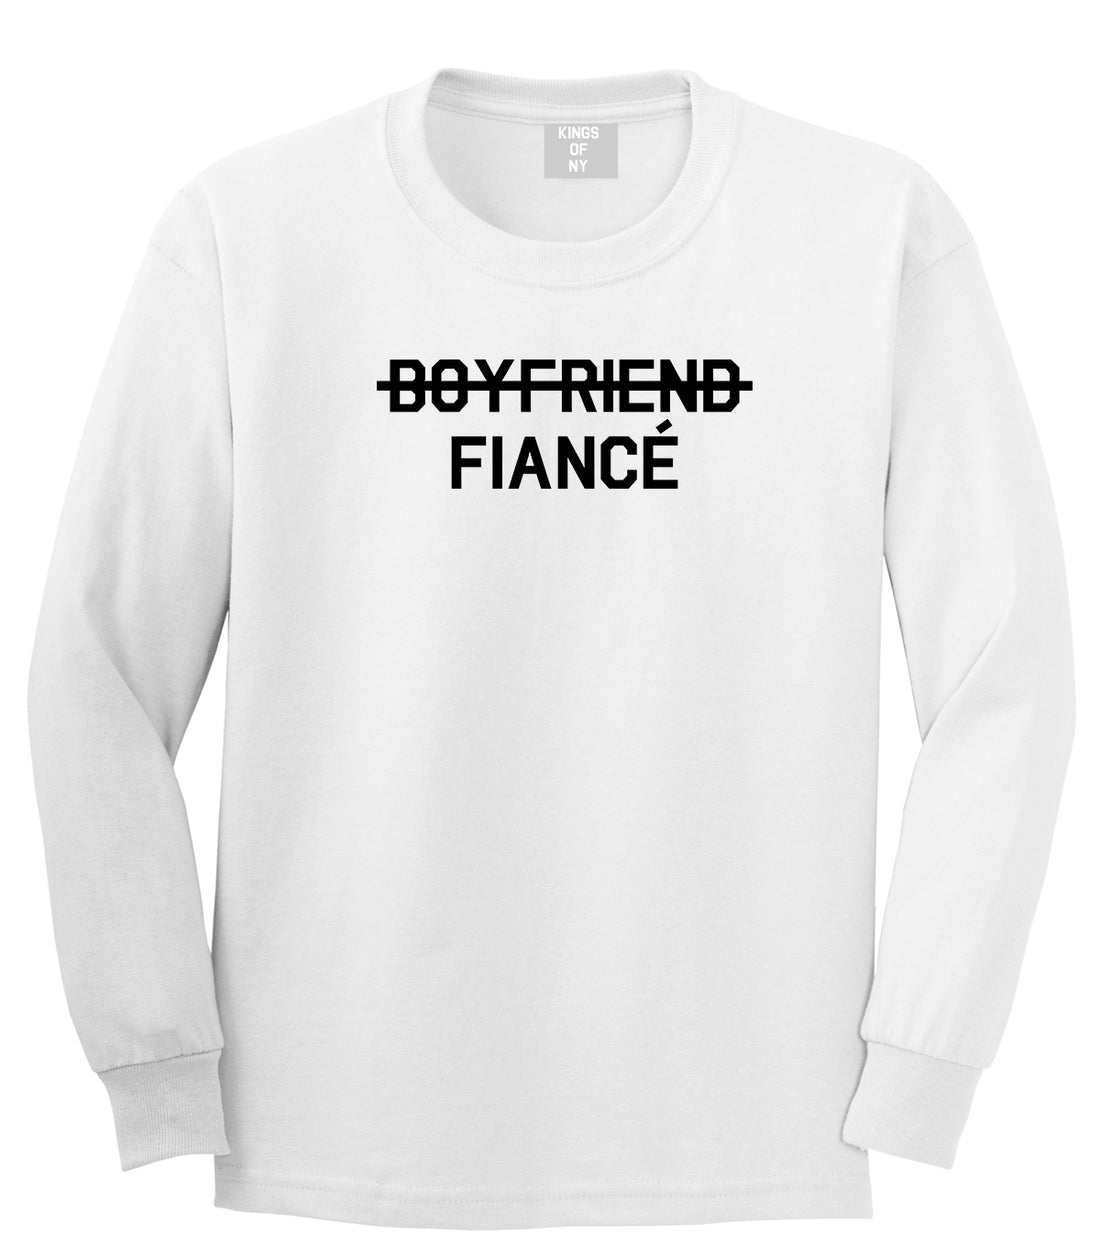 Boyfriend Fiance Engagement Mens White Long Sleeve T-Shirt by KINGS OF NY